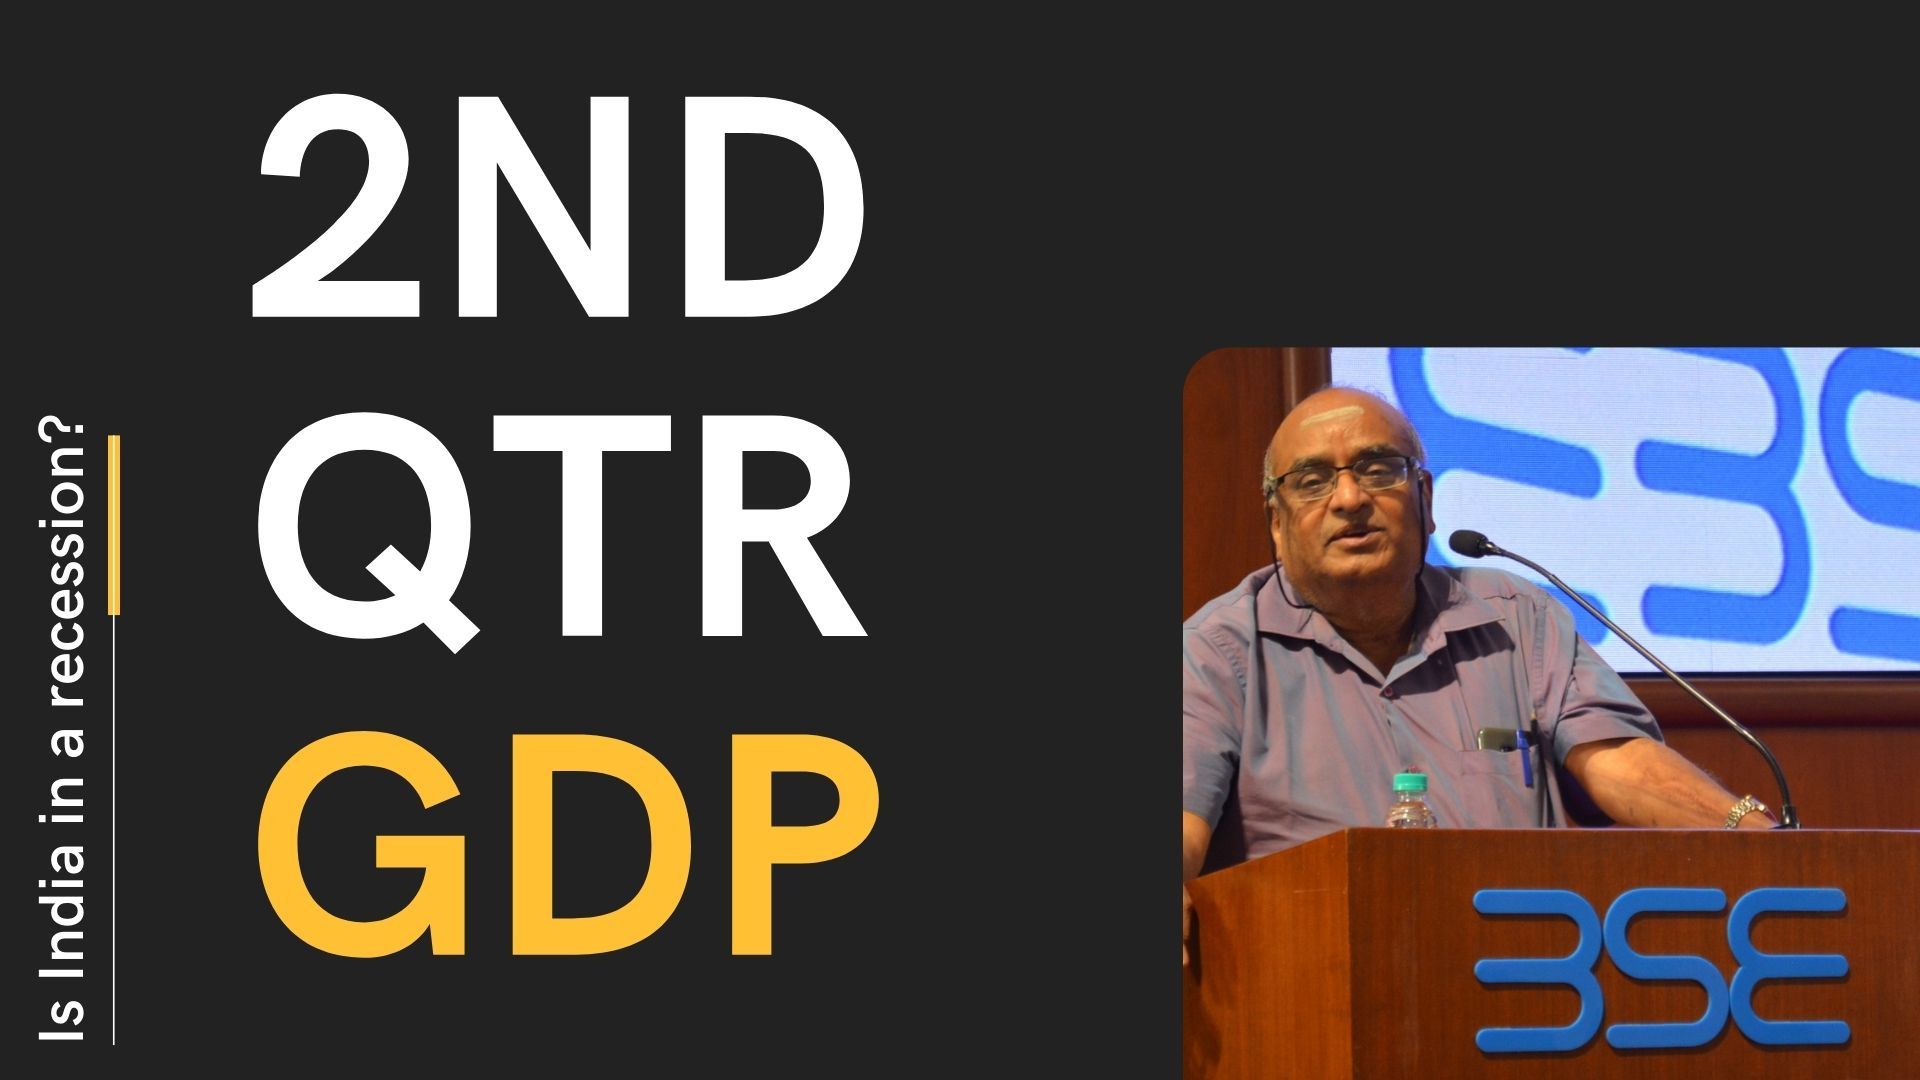 While foreign reserves are good, is India in danger of slipping into a recession? Prof RV weighs the pros and cons and has a few suggestions on how to turn the economy around. A must watch!